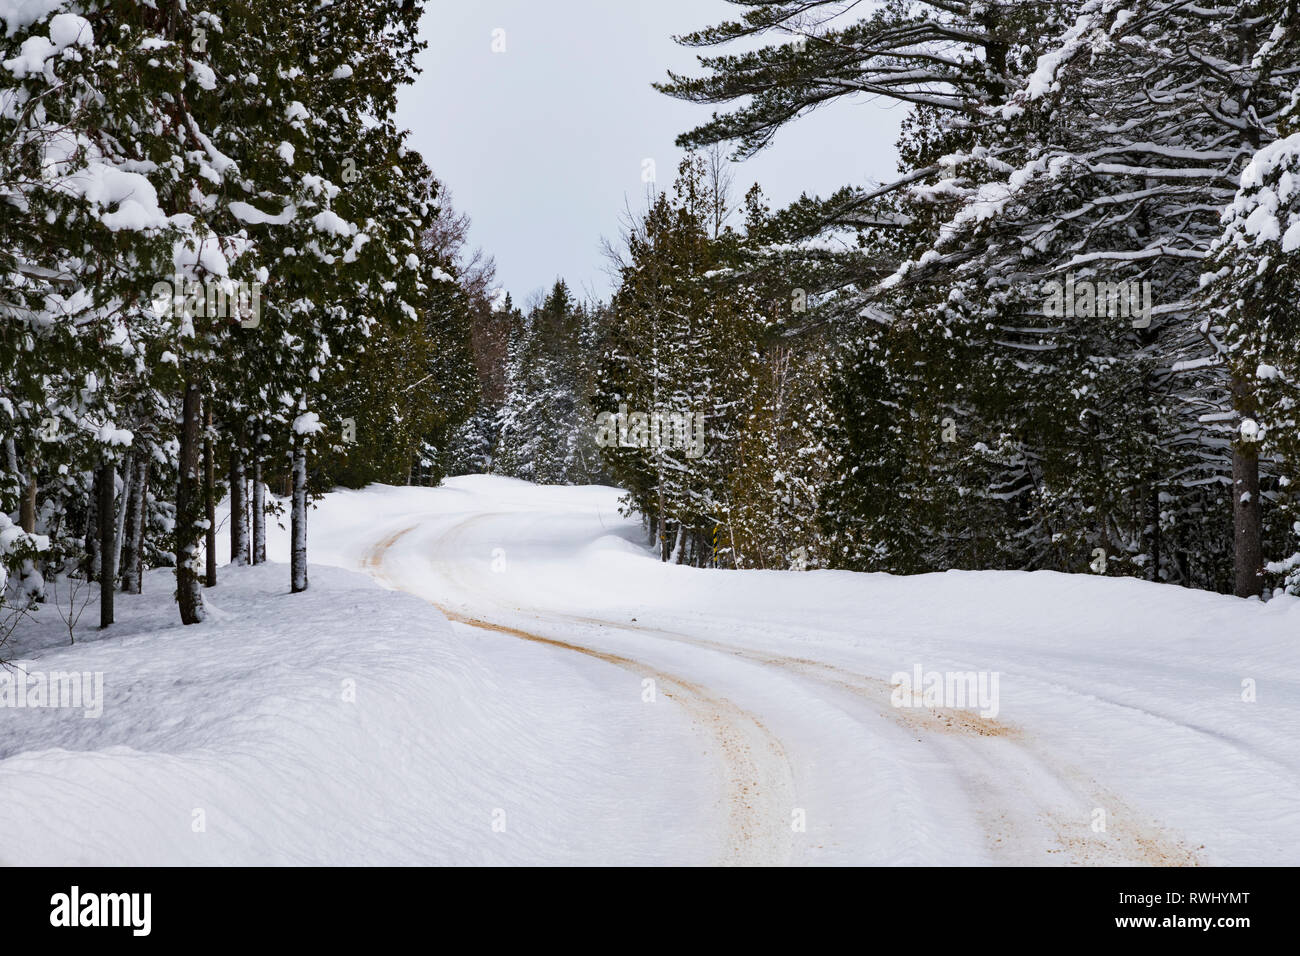 The road into Cyprus Lake Campground, Bruce Peninsula National Park, is a winter wonderland on a snowy day. Cyprus Lake, Ontario, Canada Stock Photo